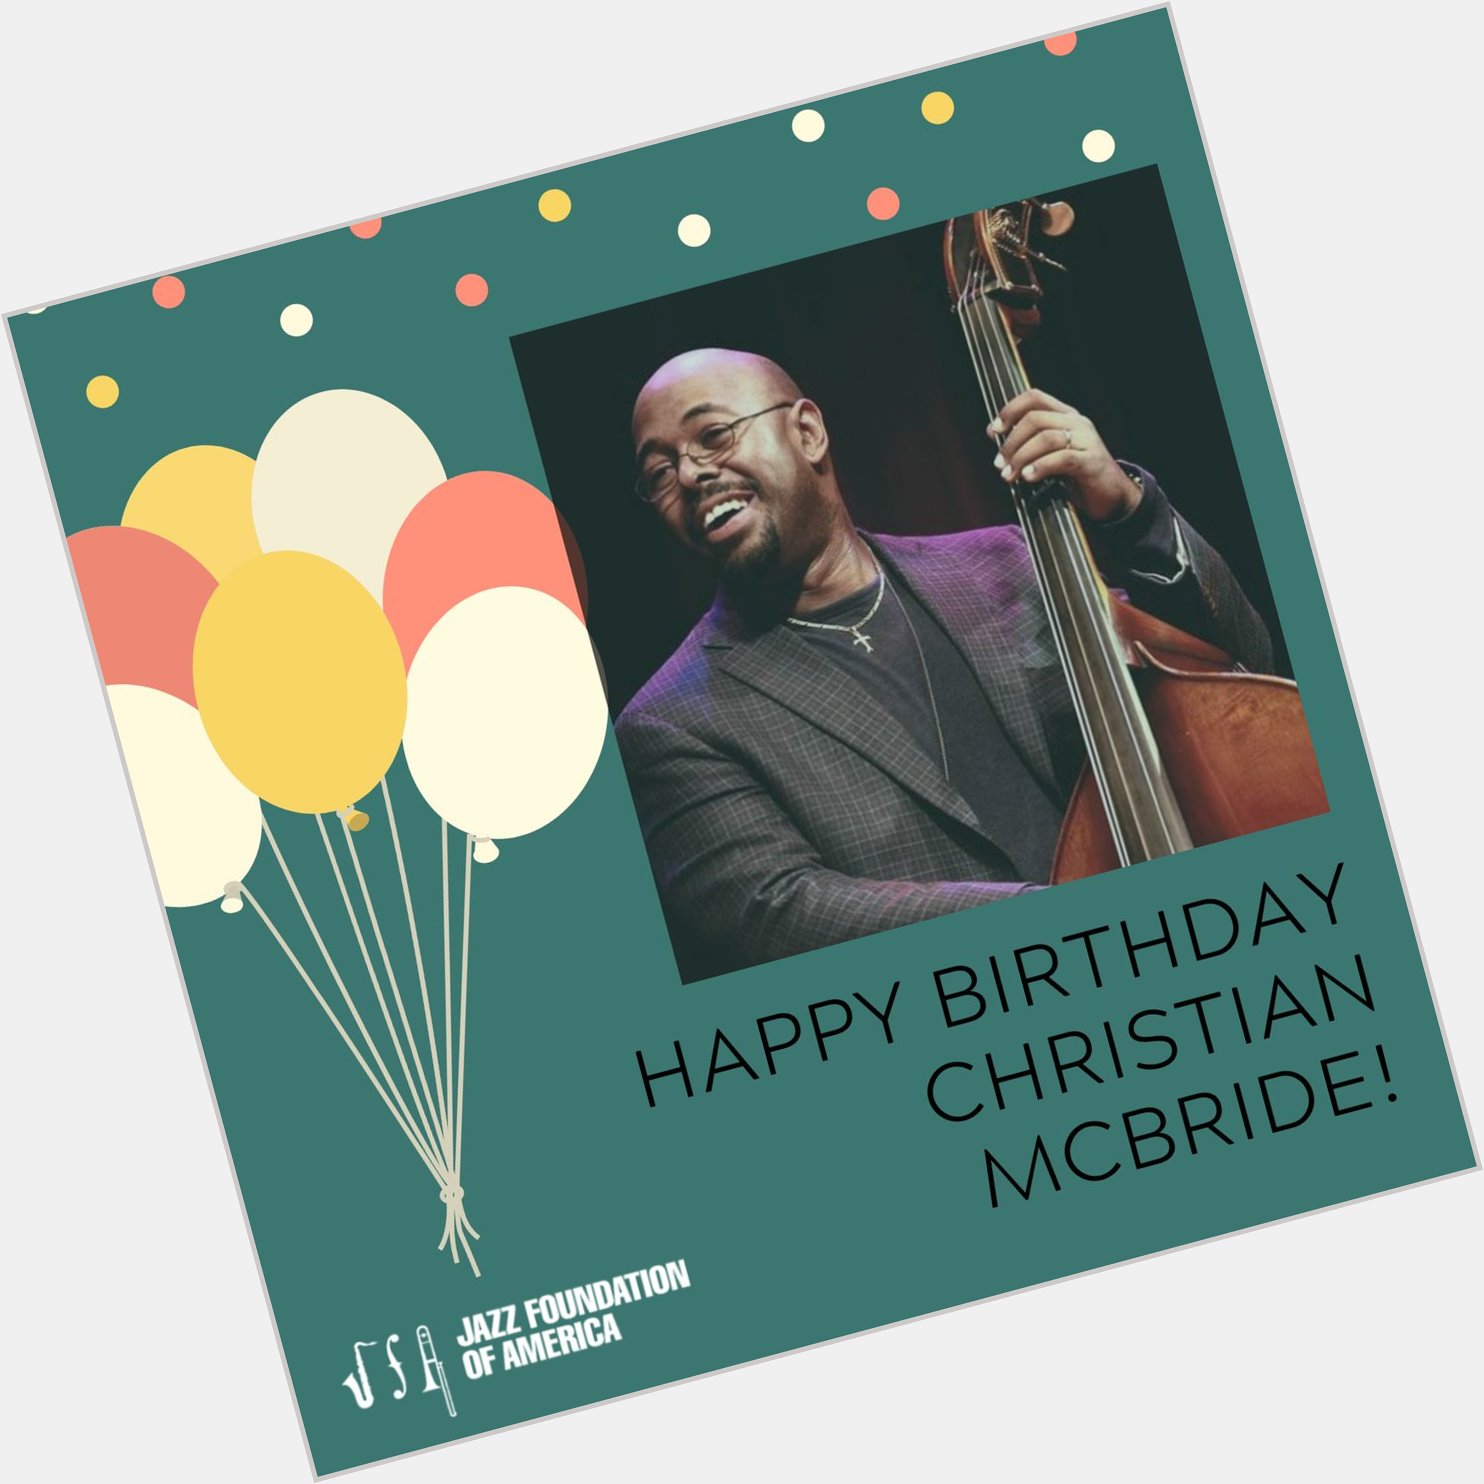 Happy 49th birthday to bassist extraordinaire Christian McBride! We hope your day is as great as you  